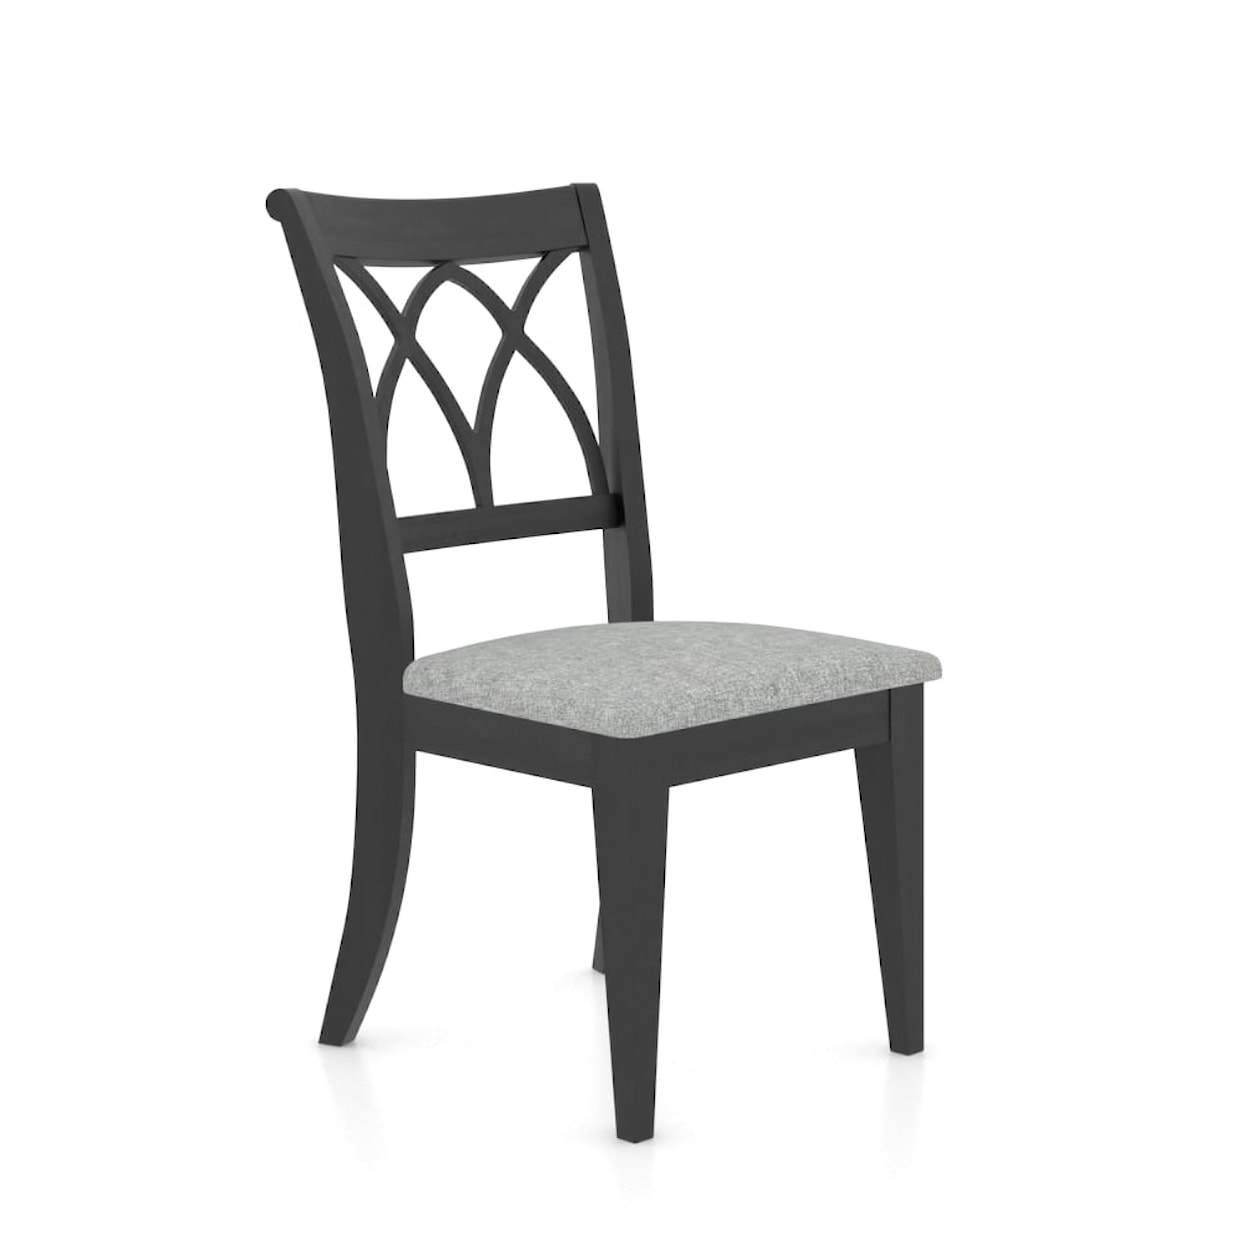 Canadel Gourmet. Customizable Dining Chair